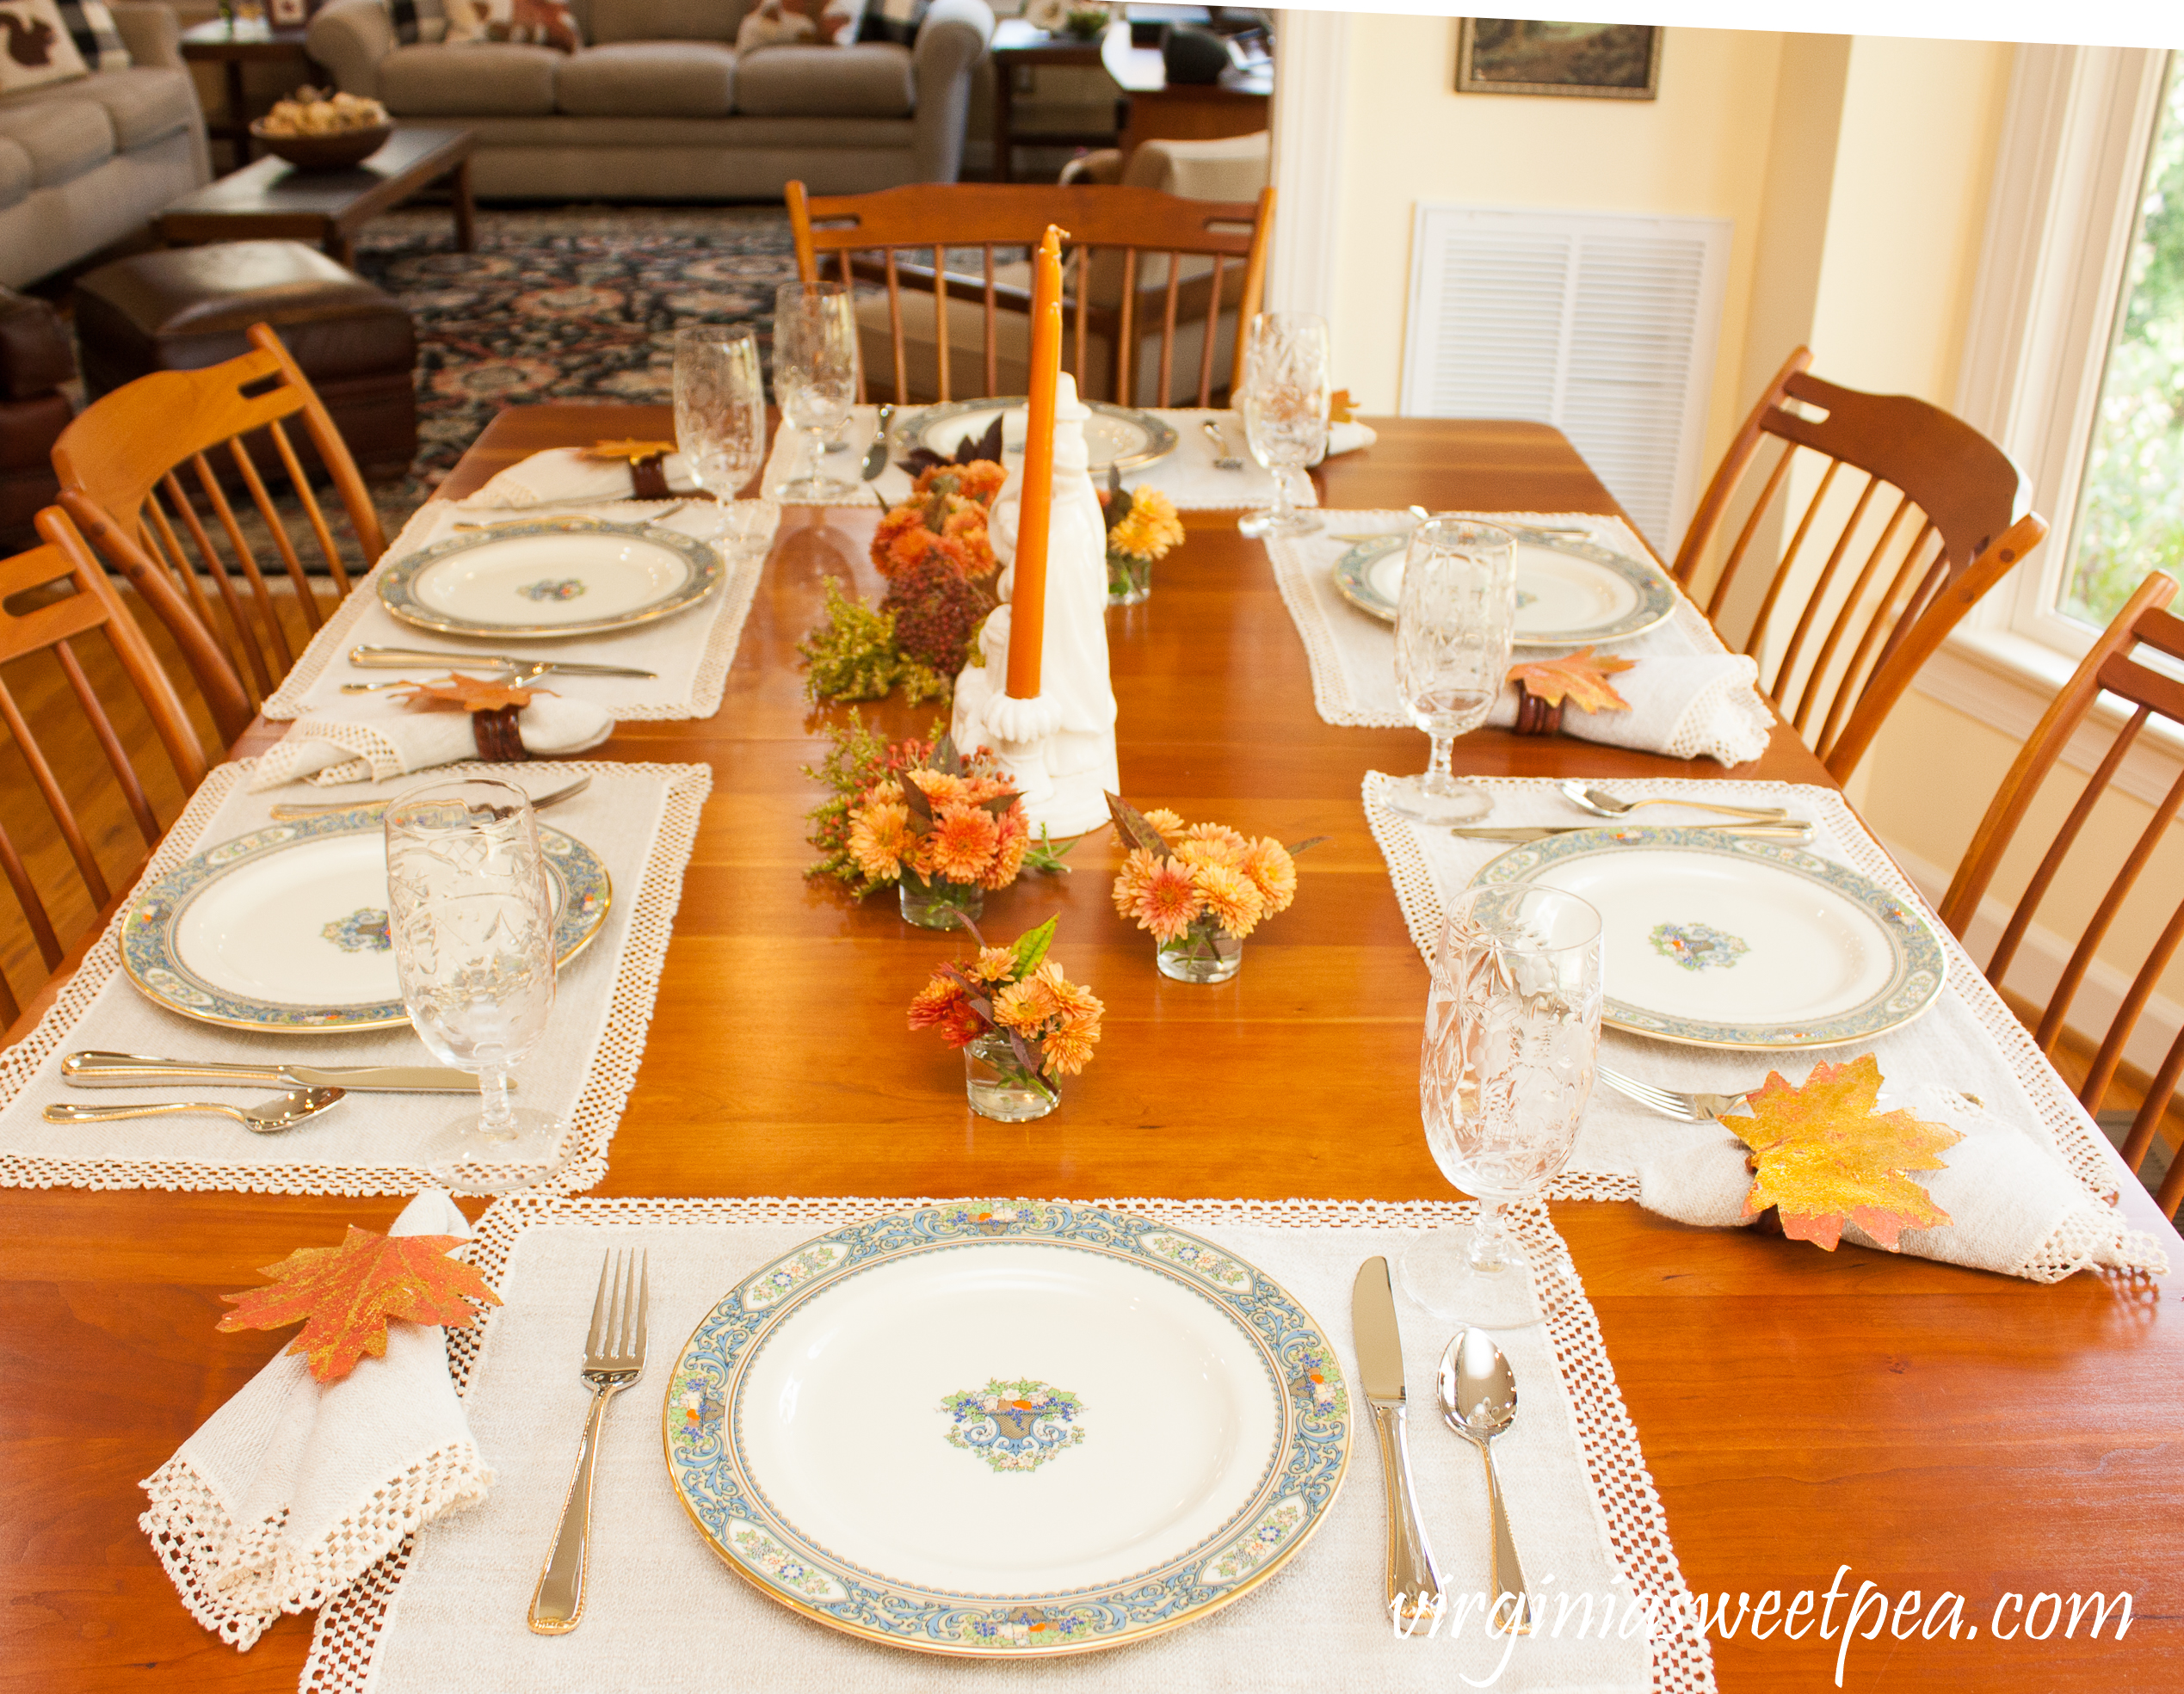 We Gather Together Thanksgiving Table - Get ideas for setting your table for Thanksgiving from 20+ bloggers. #thanksgivingdecor #thanksgiving #vintagepilgrims #thanksgivingtablescape